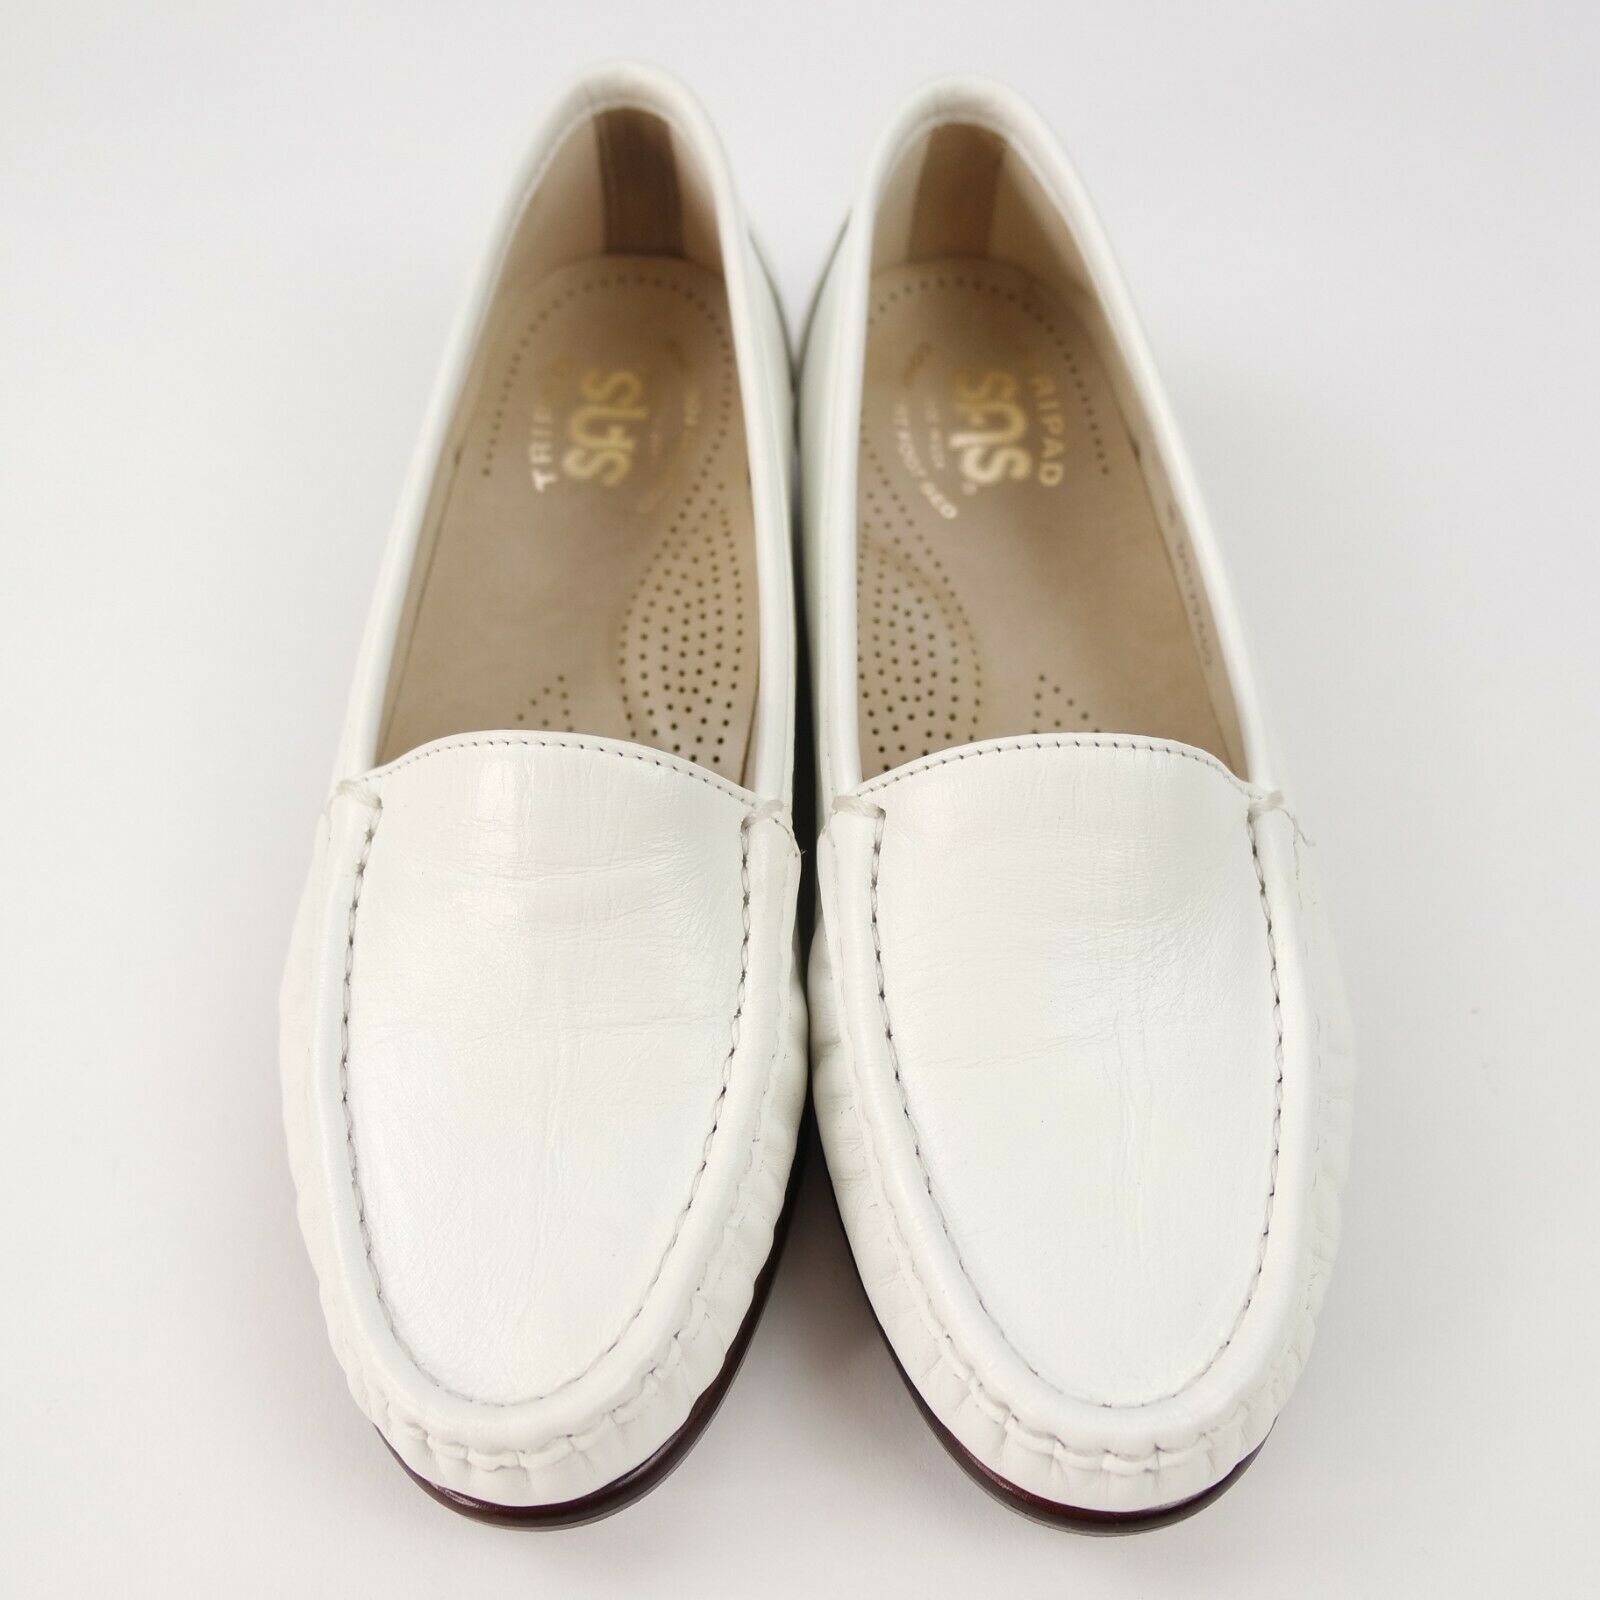 SAS Women's Loafers White Leather Slip On Shoes Size 6 M Tri-Pad Comfort